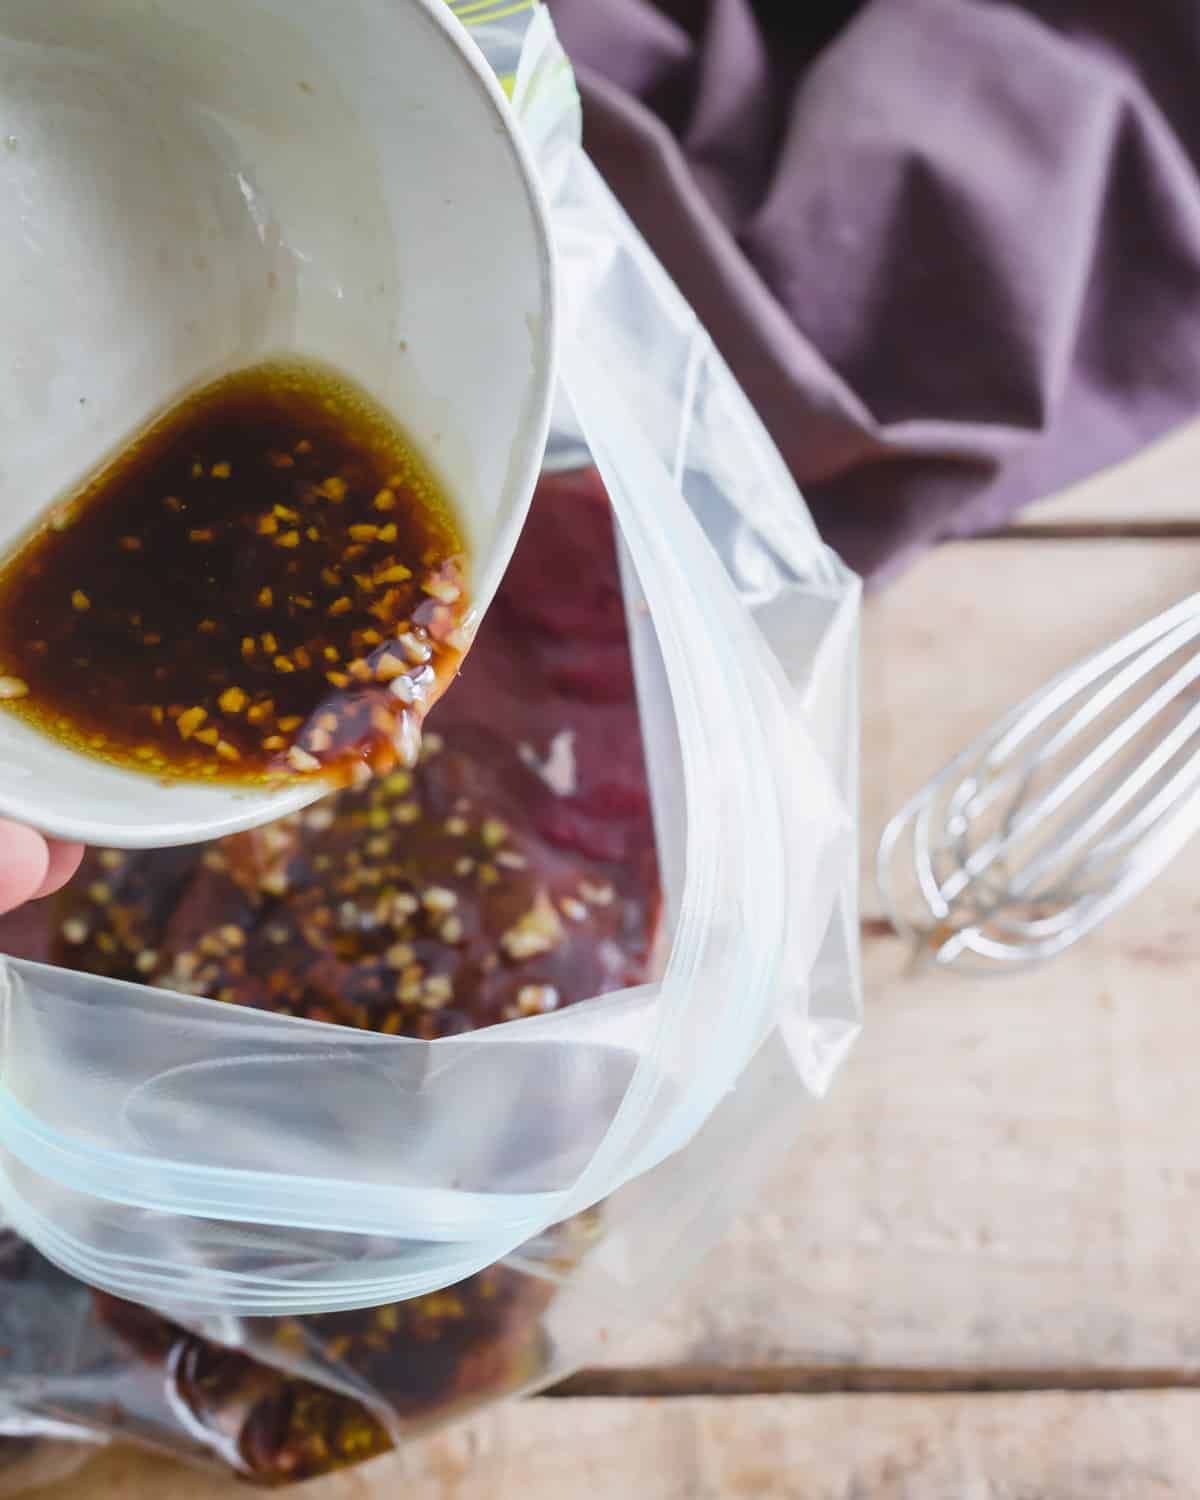 Quick and simple marinade for venison backstrap poured over venison in a plastic bag.